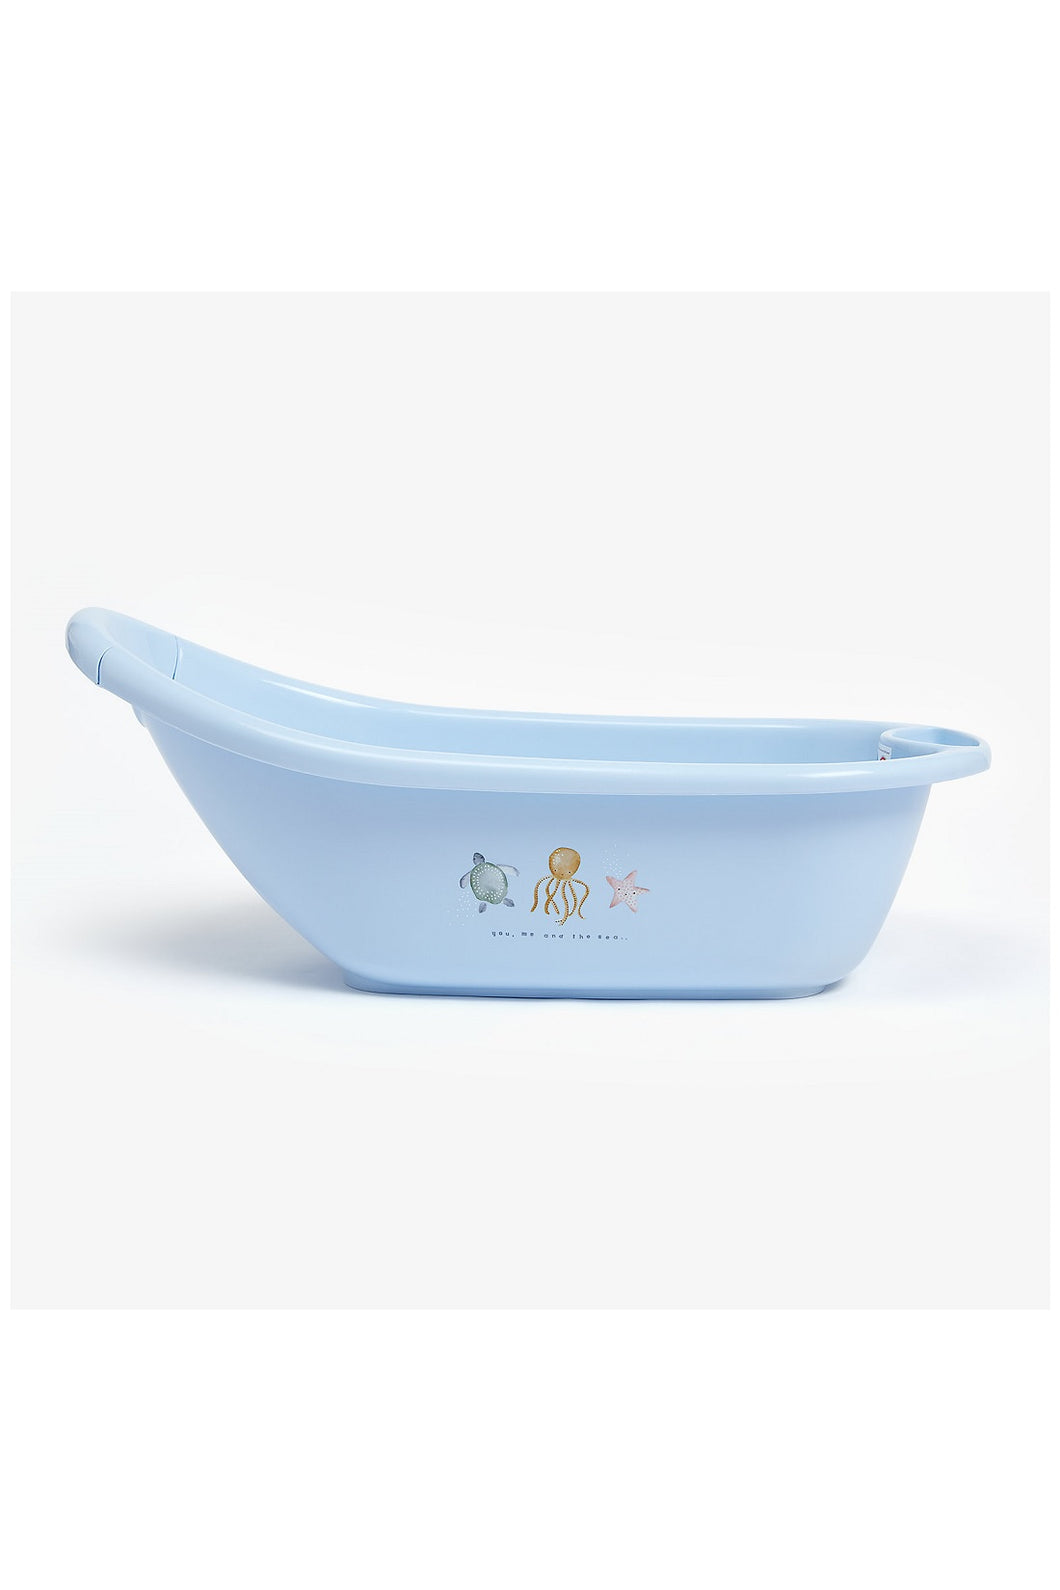 Mothercare You Me And The Sea Bath 1